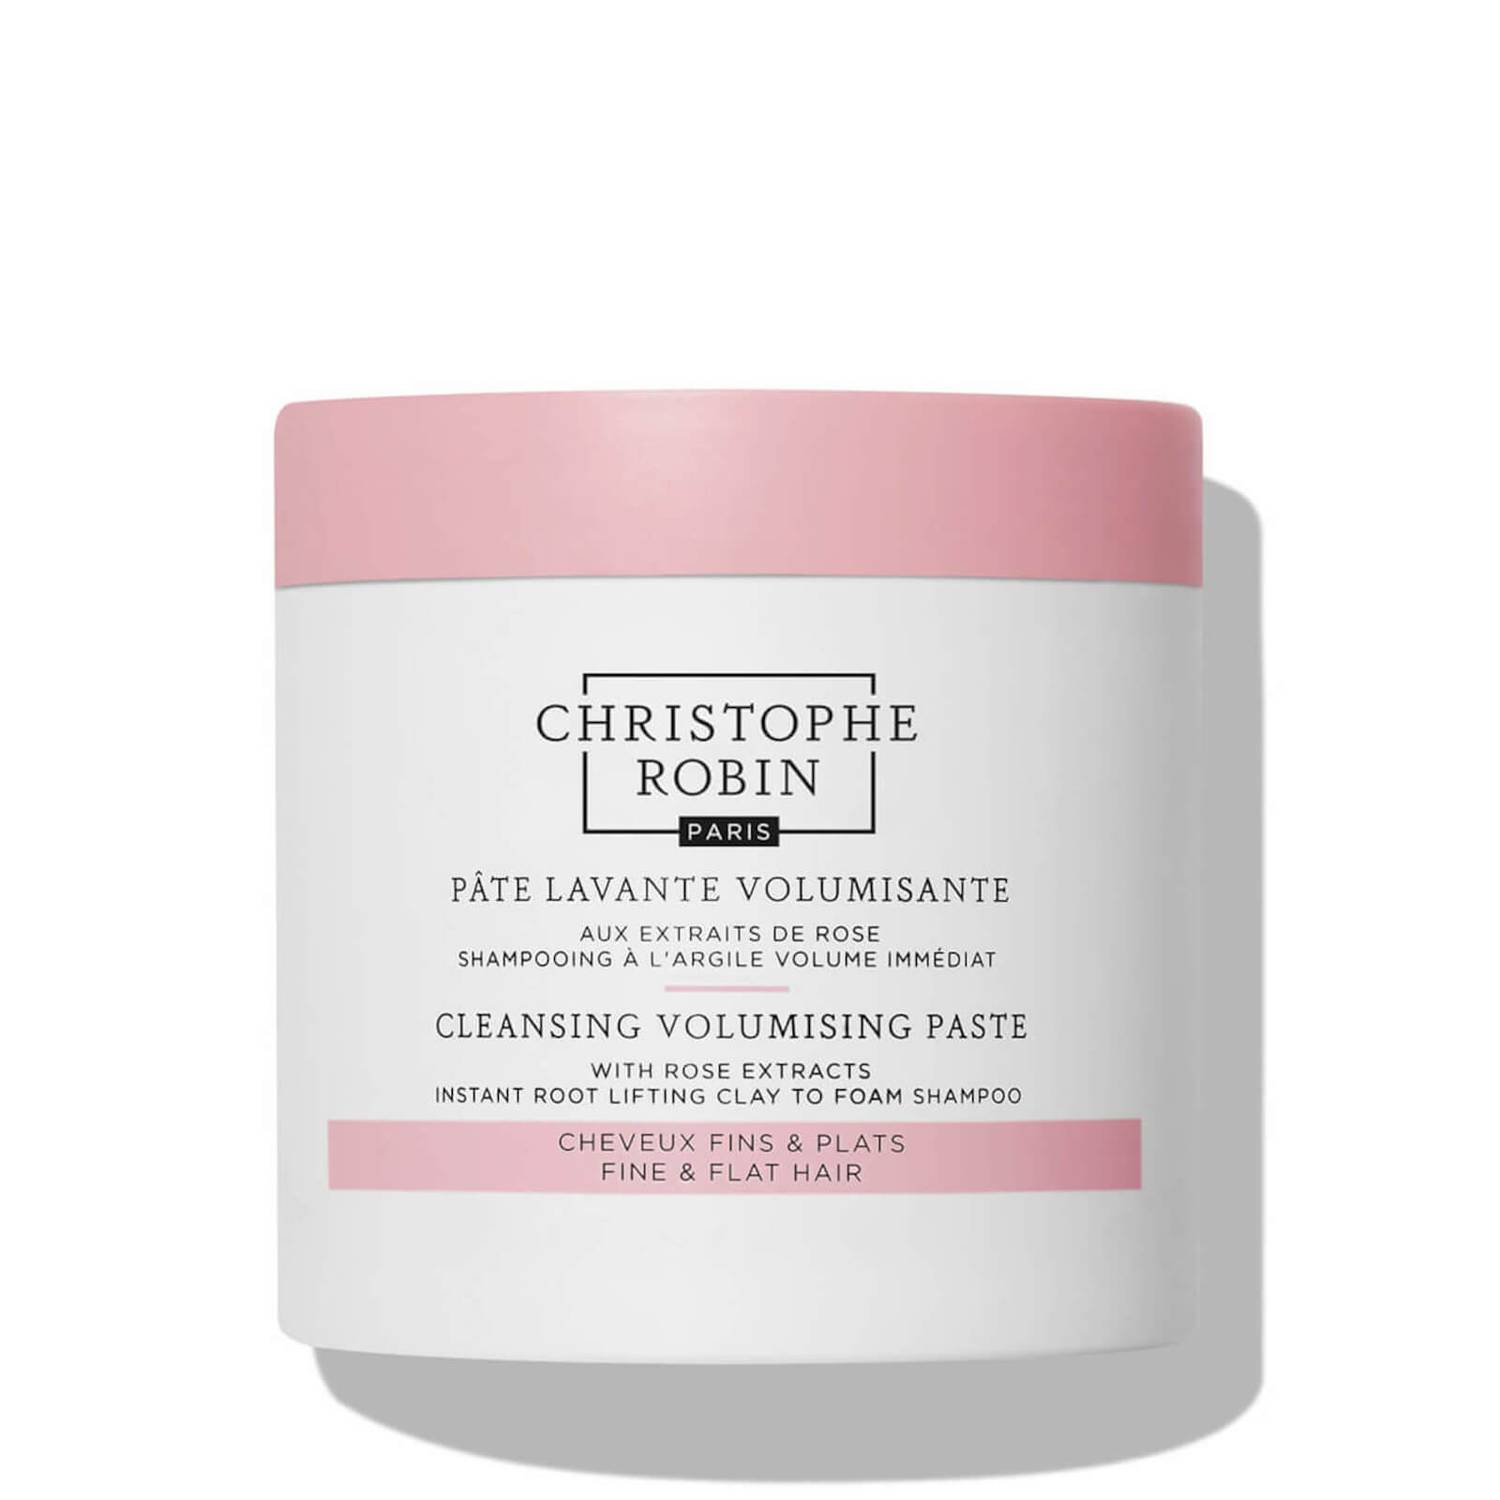 Cleansing Volumising Paste with Rose Extracts